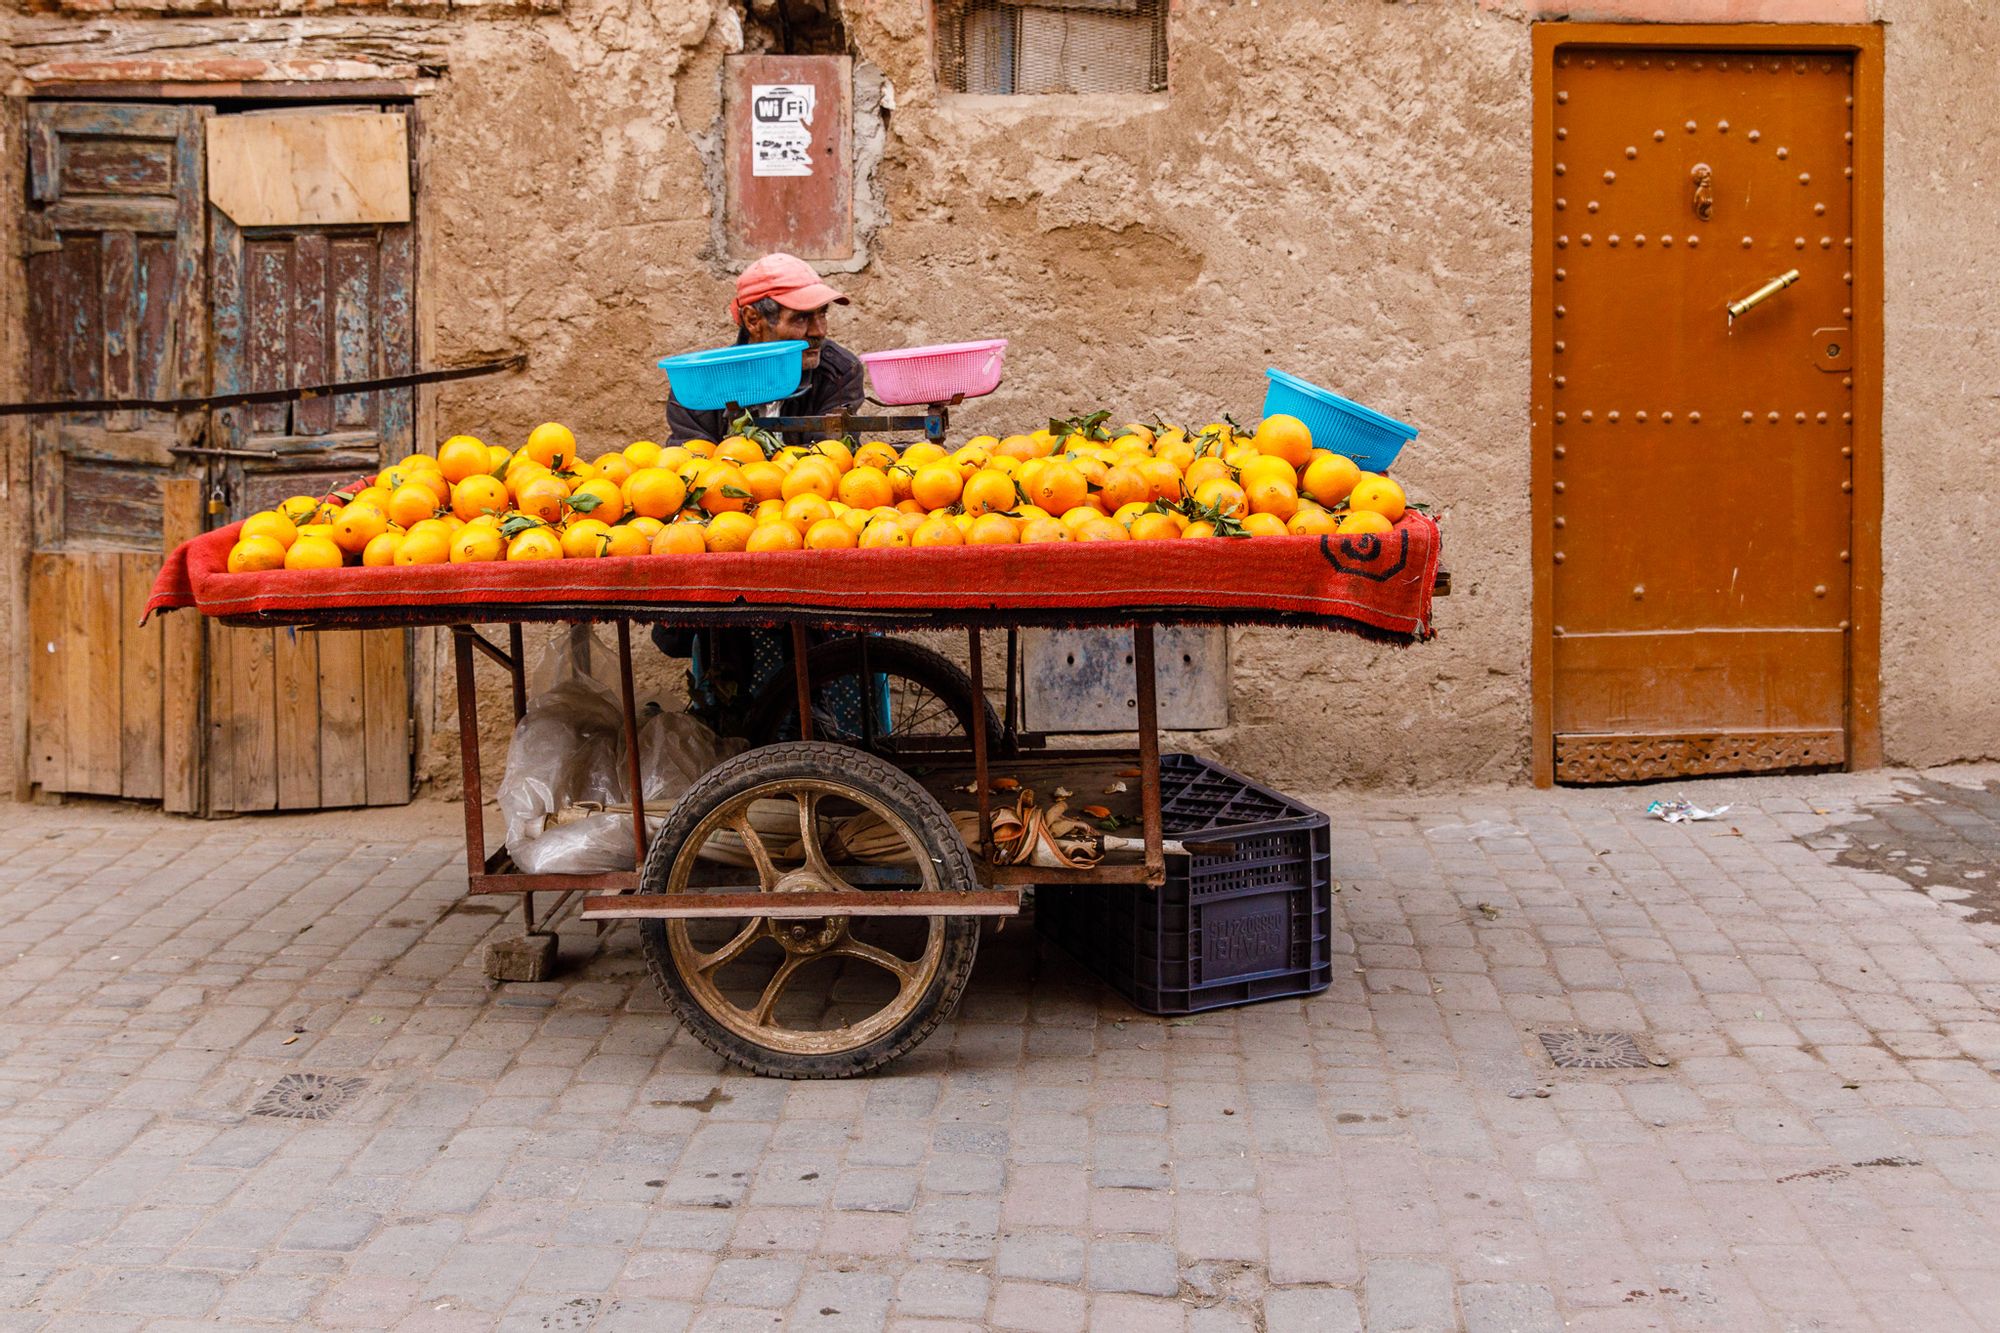 A man selling oranges on a cart in Imlil, Morocco.